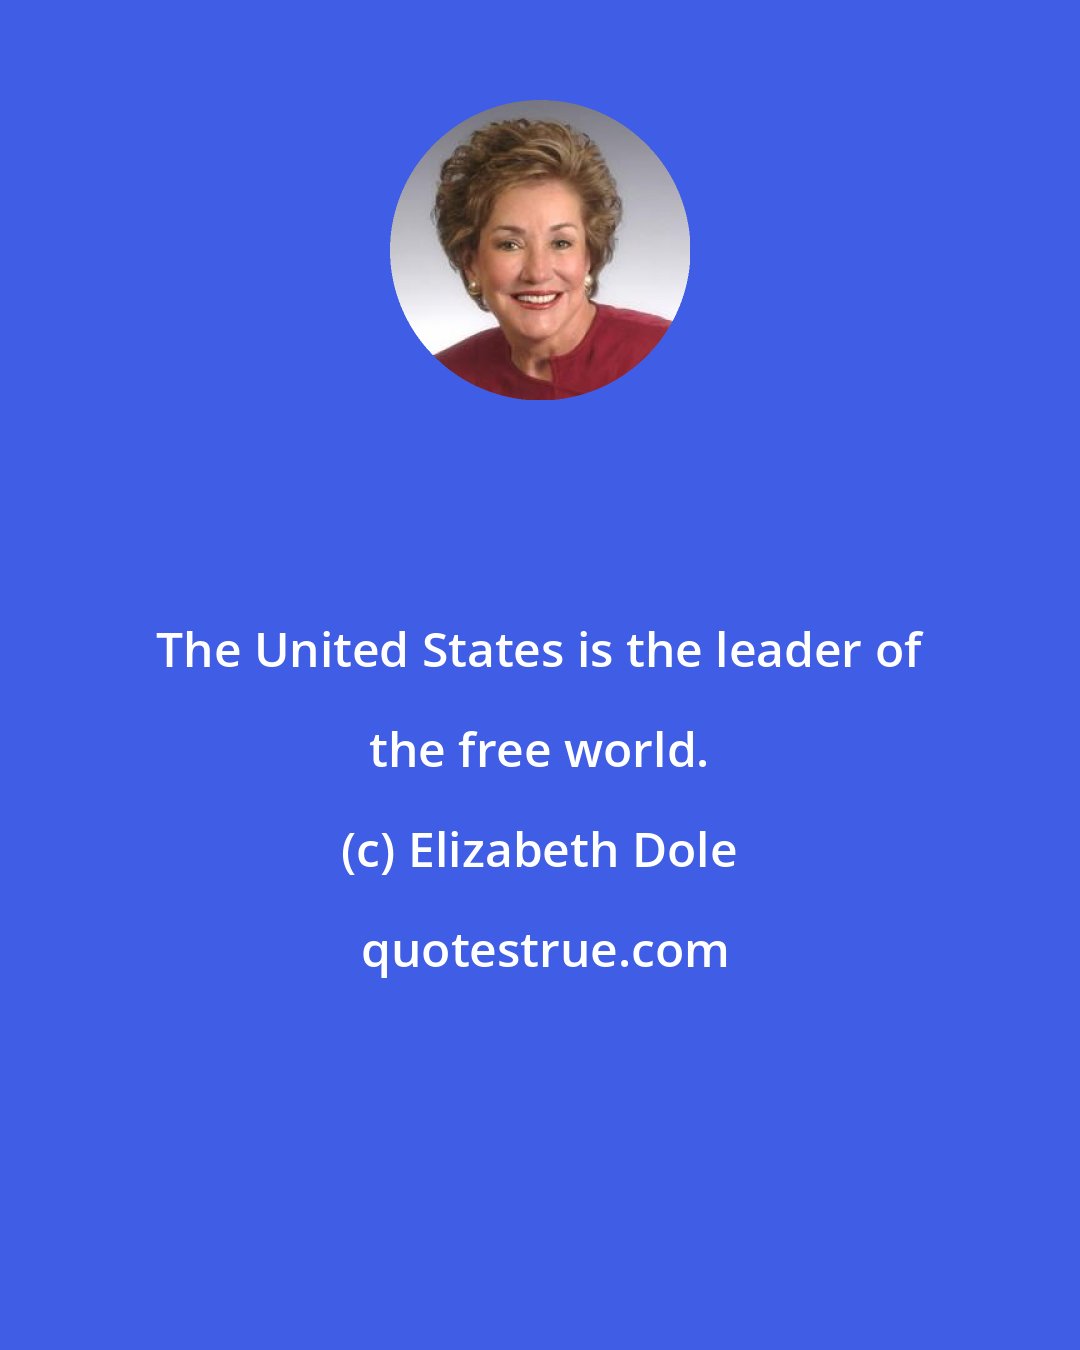 Elizabeth Dole: The United States is the leader of the free world.